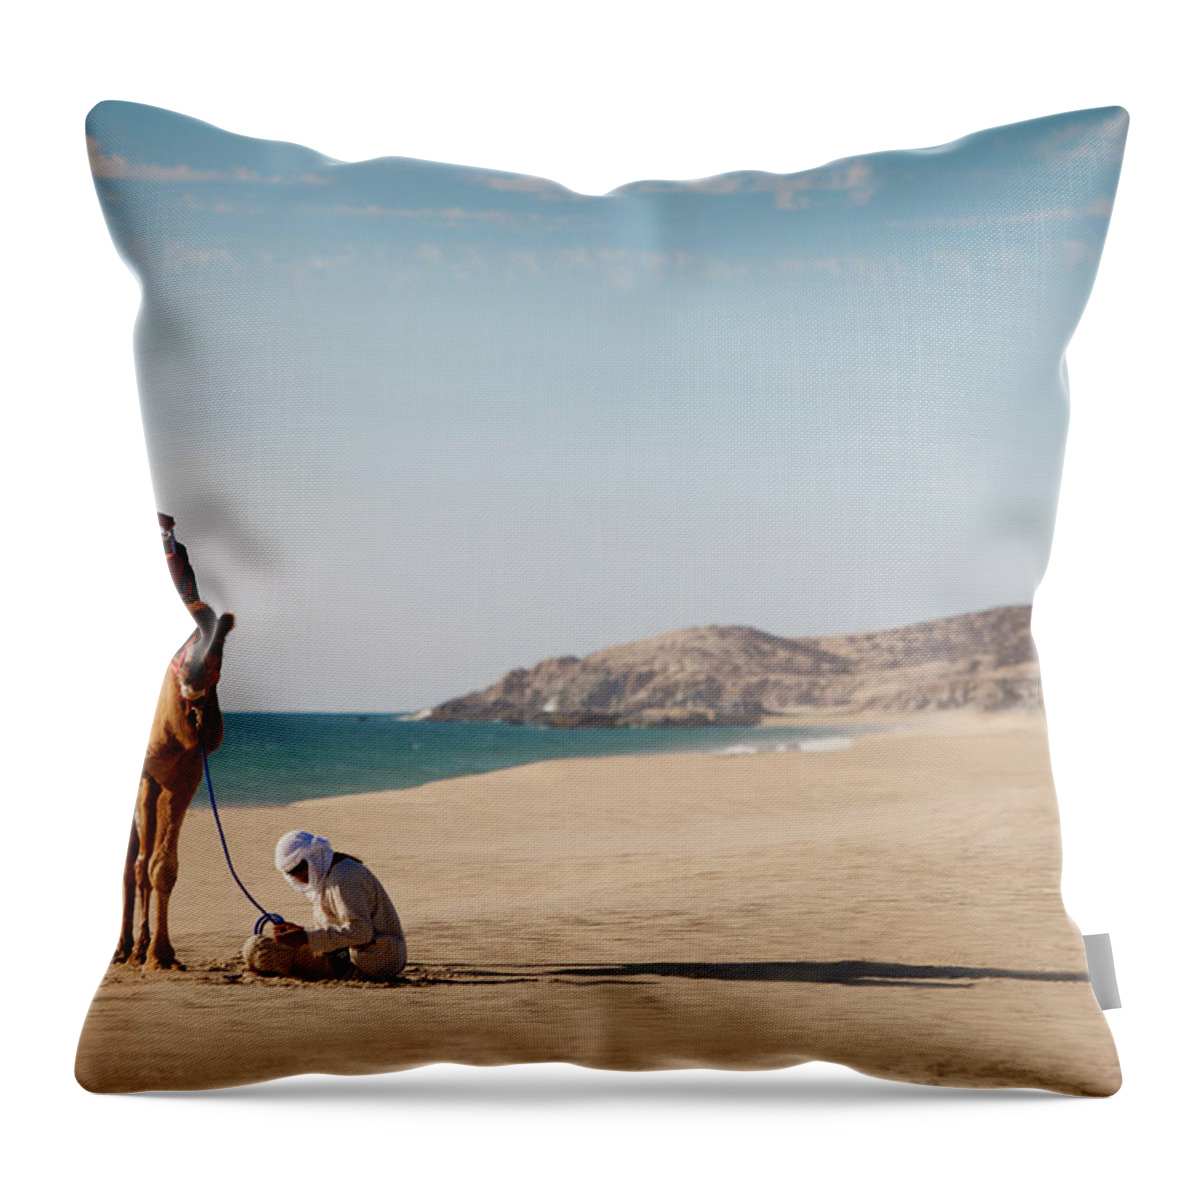 Mature Adult Throw Pillow featuring the photograph Camel And Guide Sit On White Sandy by Justin Lewis